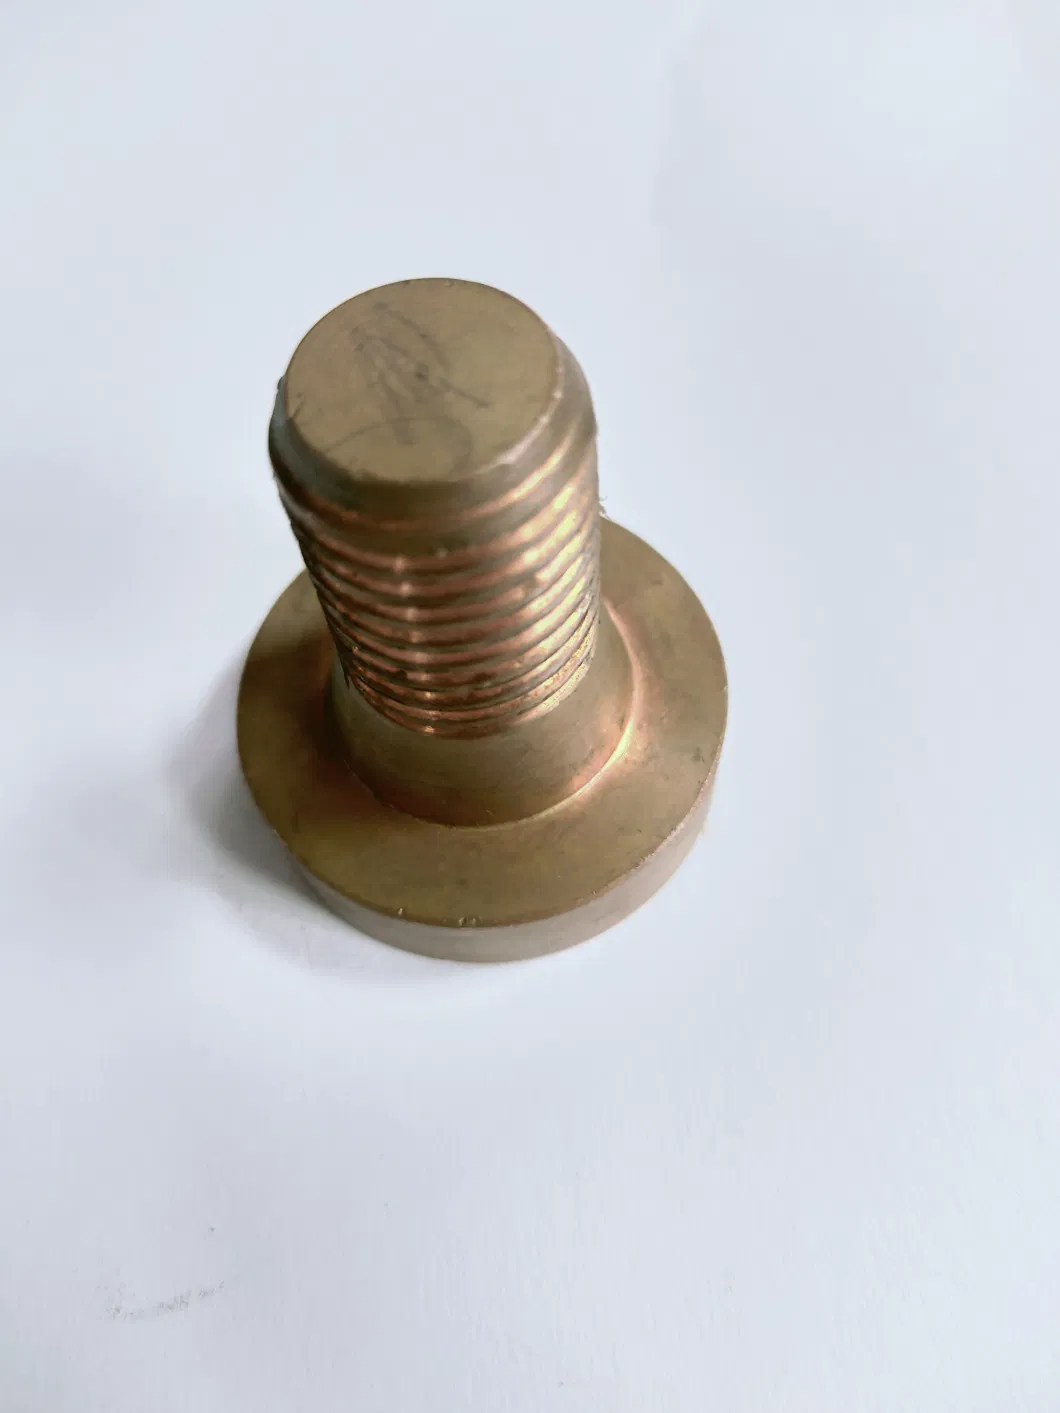 Material Copper Alloy Machining Round Part